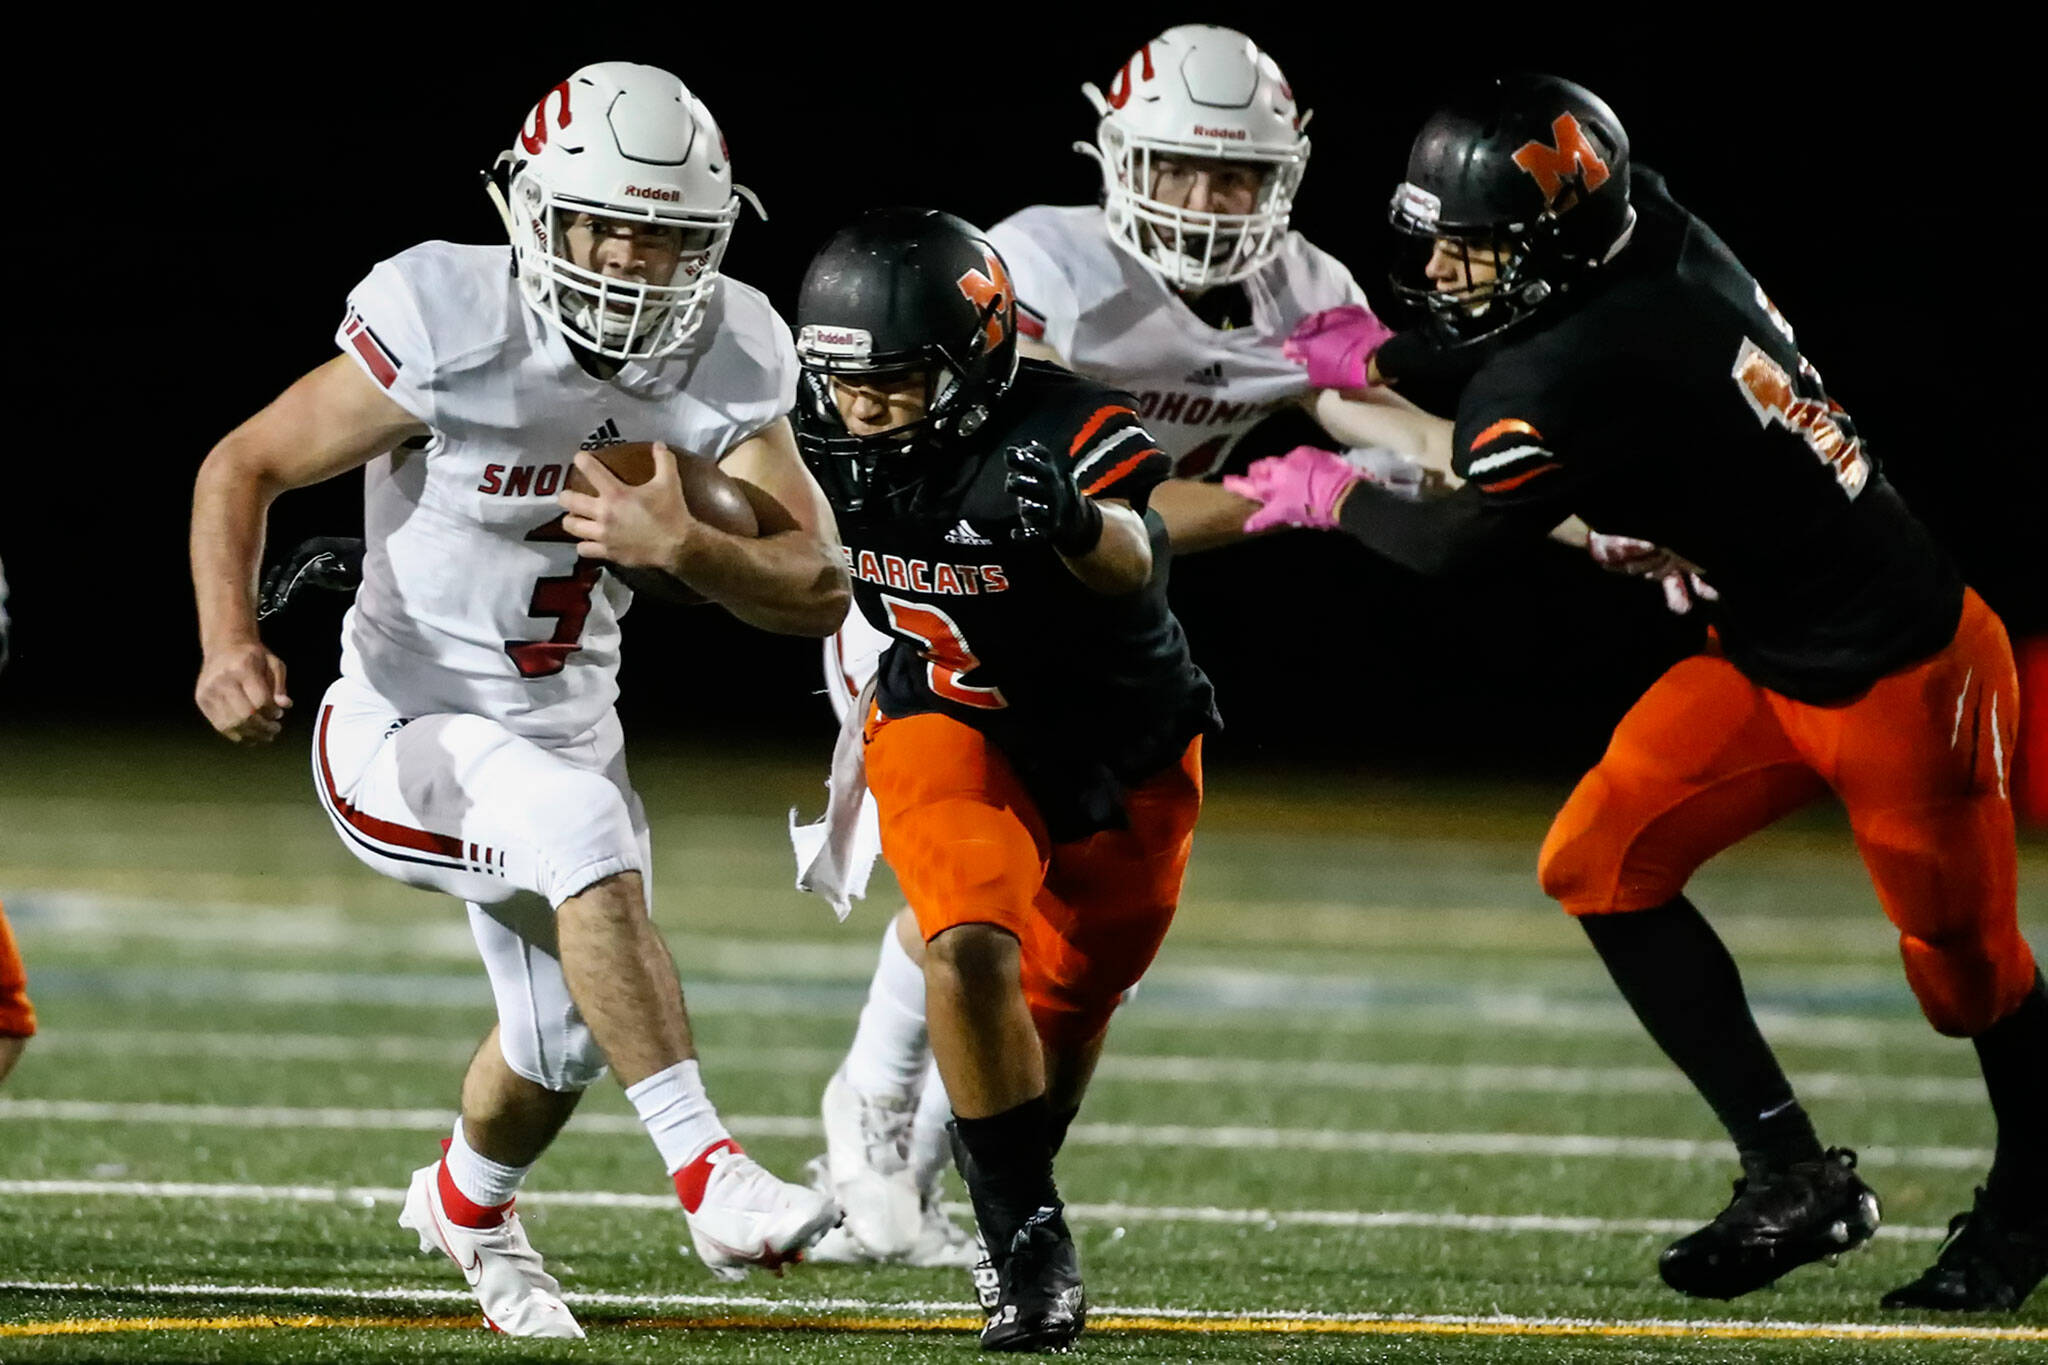 Joshua Vandergriend and Snohomish face Oak Harbor in a loser-out Week 9 crossover game. (Kevin Clark / The Herald)